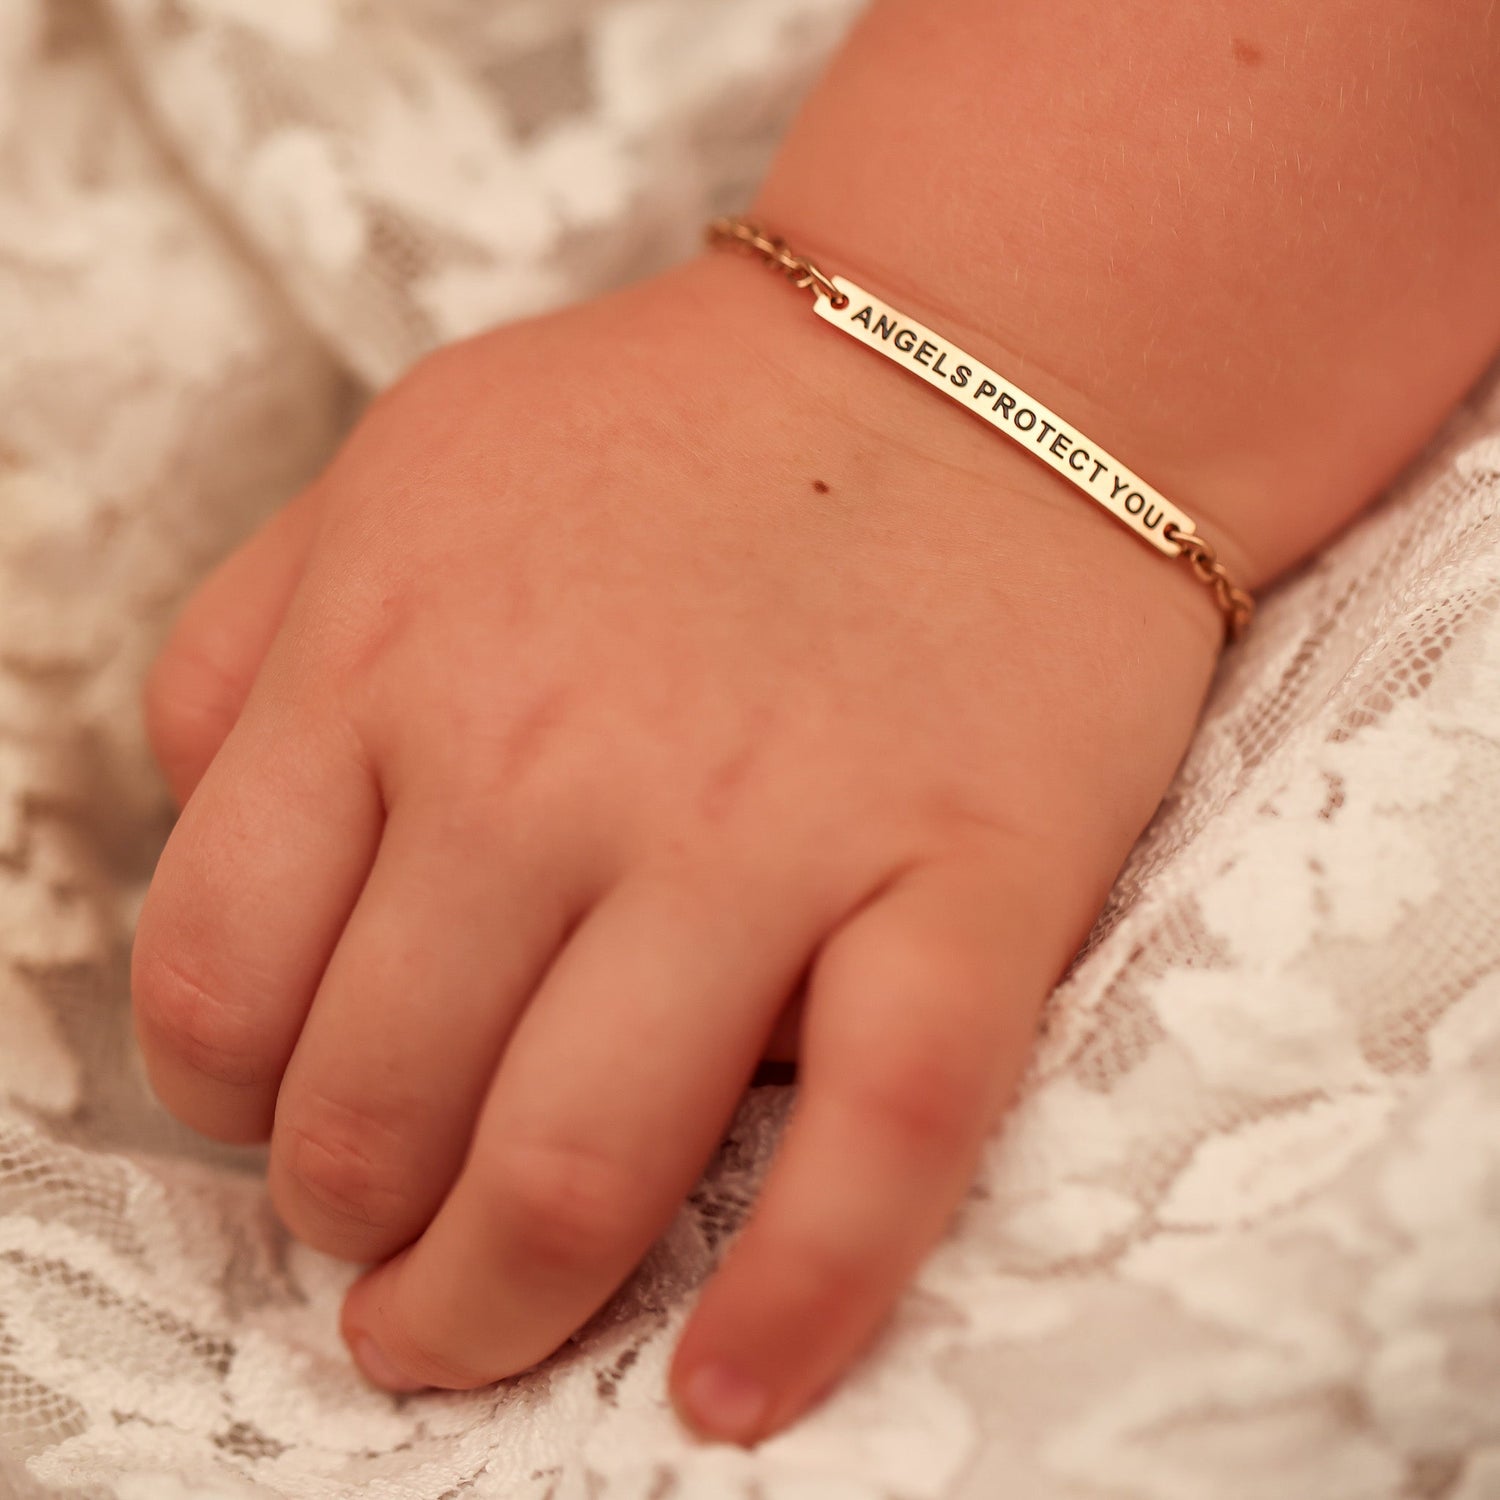 ANGELS PROTECT YOU - KIDS CHAIN BRACELET - Inspiration Co.